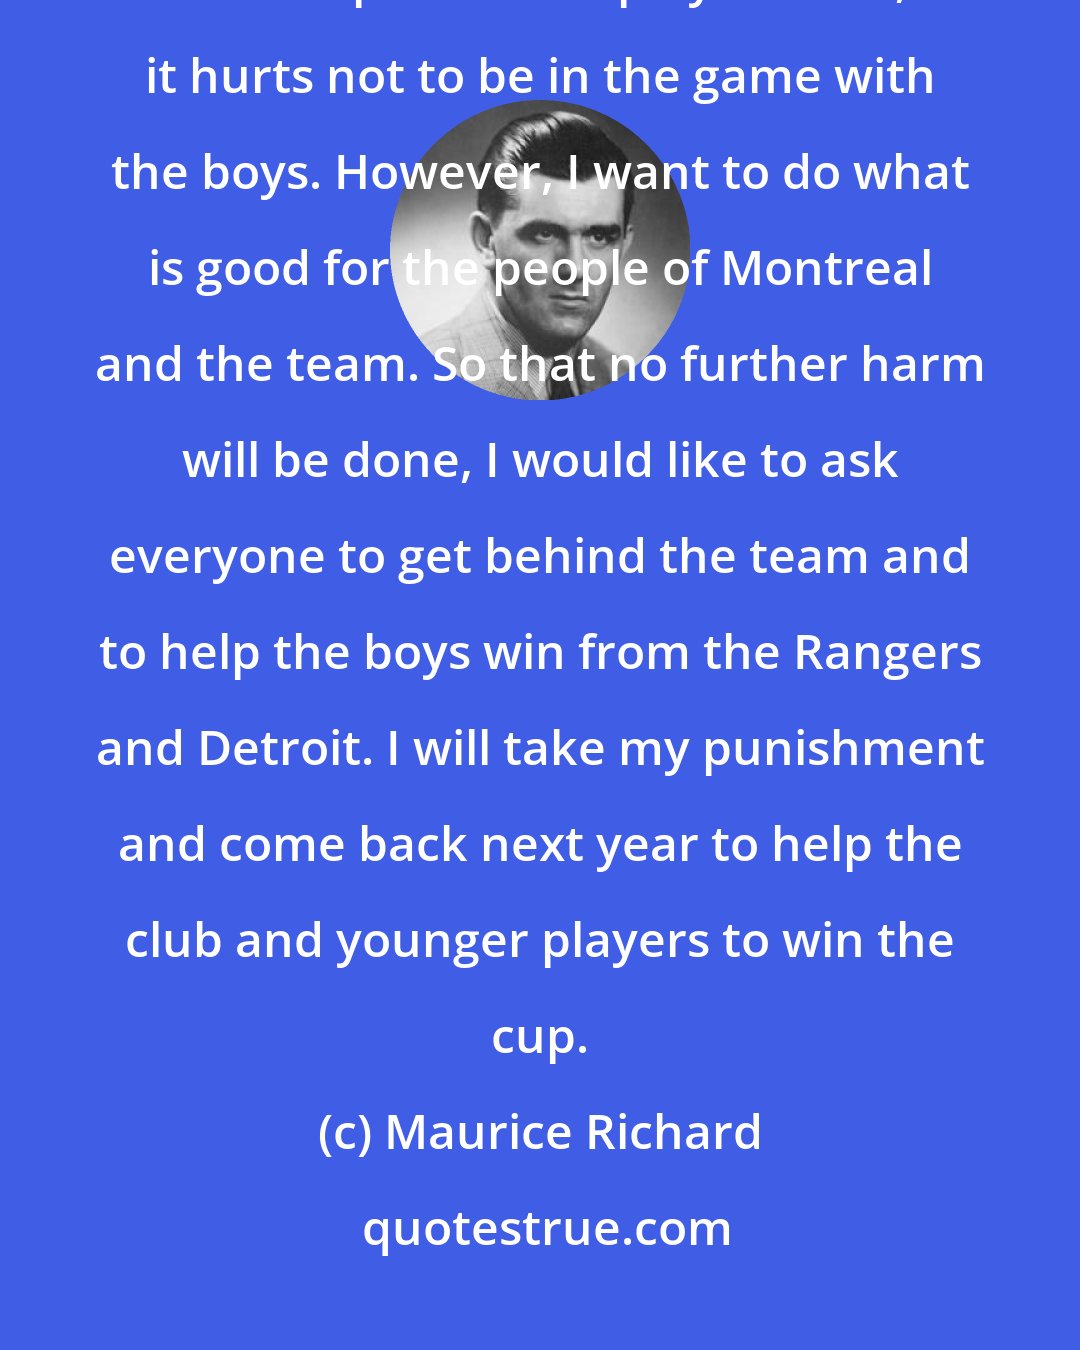 Maurice Richard: Because I always try so hard to win and had my troubles in Boston, I was suspended. At playoff time, it hurts not to be in the game with the boys. However, I want to do what is good for the people of Montreal and the team. So that no further harm will be done, I would like to ask everyone to get behind the team and to help the boys win from the Rangers and Detroit. I will take my punishment and come back next year to help the club and younger players to win the cup.